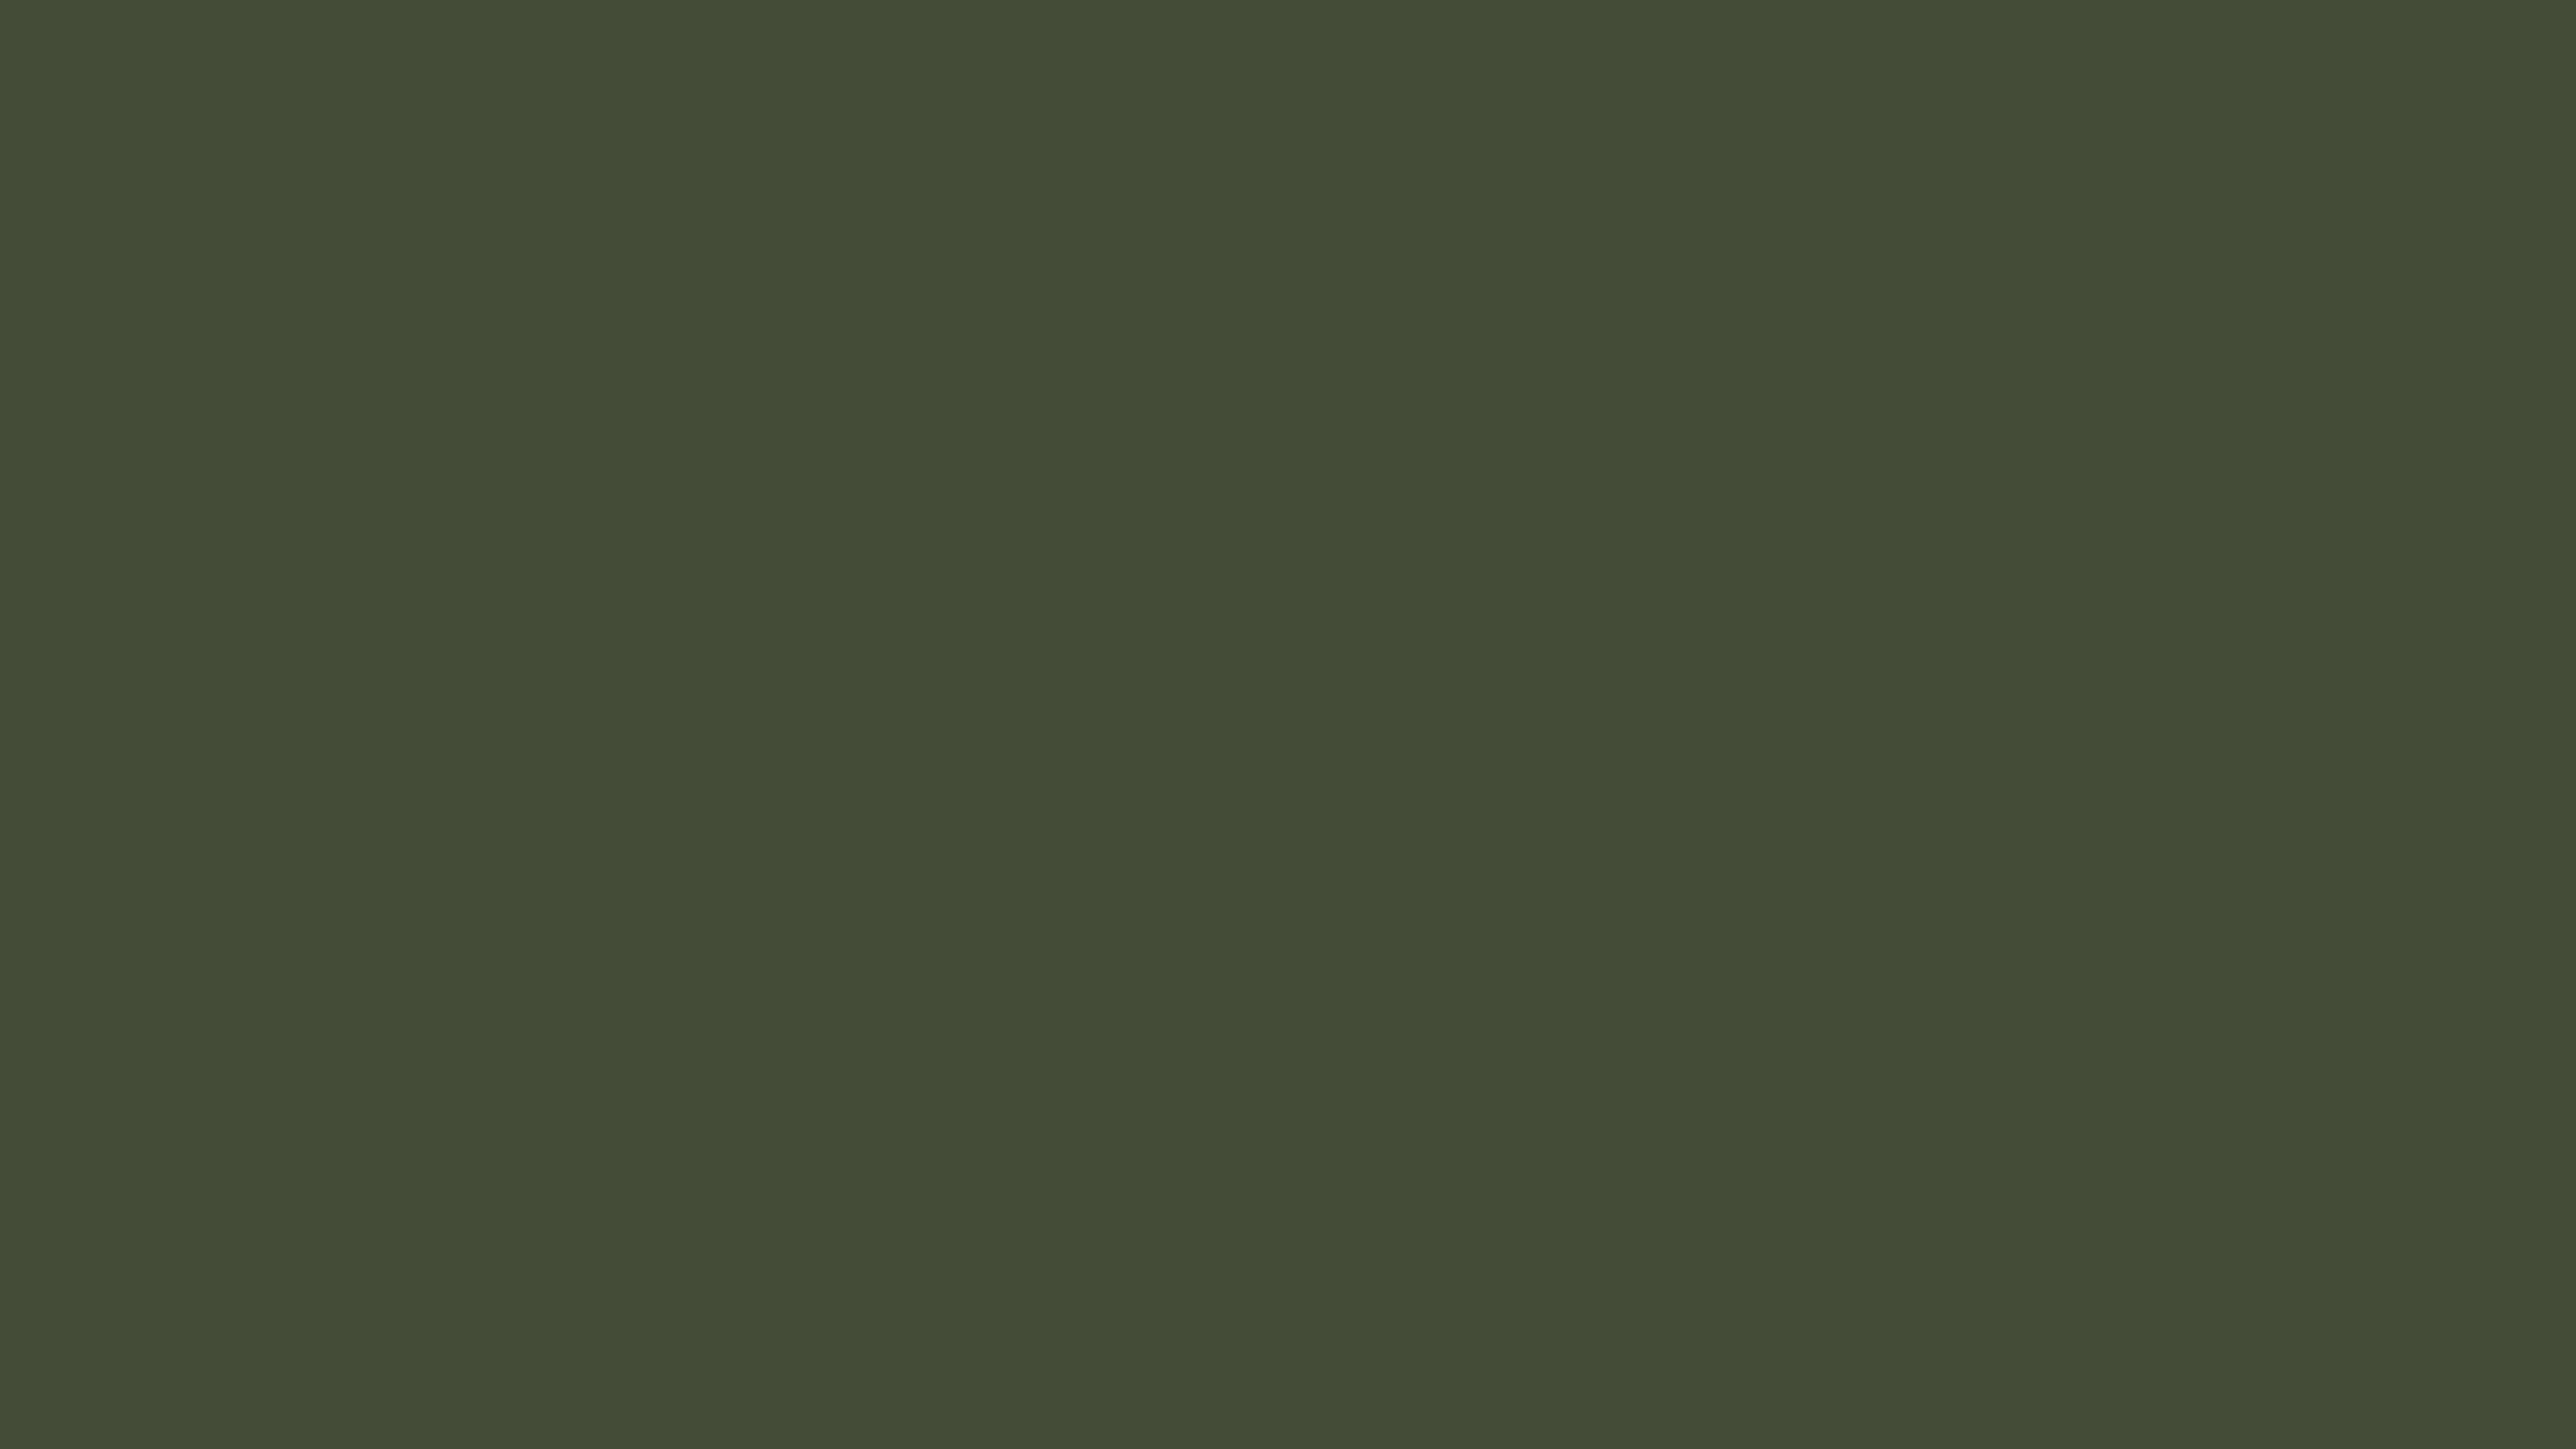 7680x4320 Rifle Green Solid Color Background